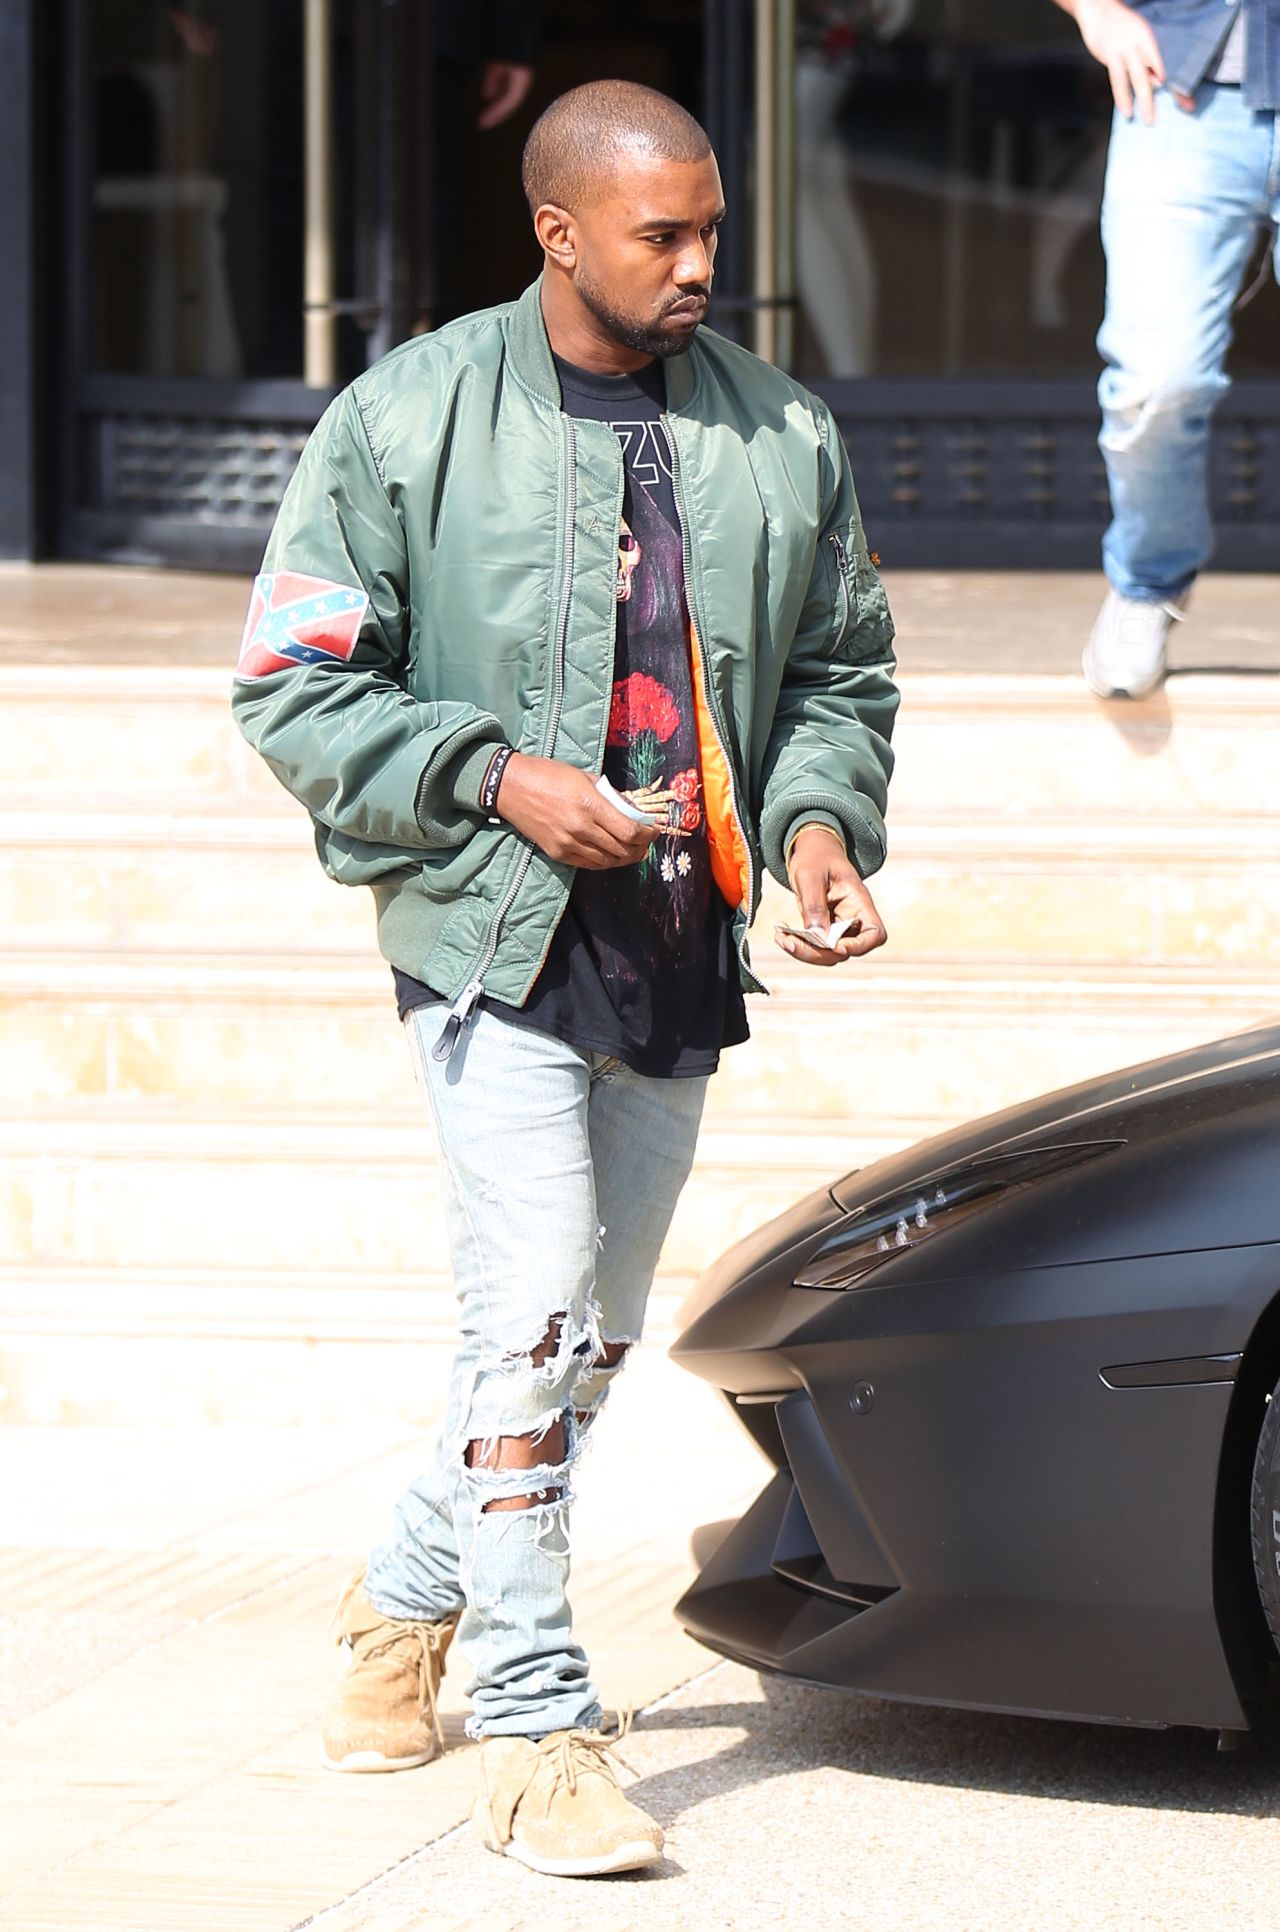 Kanye West has <a href="http://images.complex.com/complex/image/upload/t_article_image/gsiumm6907fe1qg9vaf9.png" target="_blank" target="_blank">wrapped himself in the flag</a> and worn flag decals. "I took the Confederate flag and made it my flag. It's my flag now. Now what you gonna do?" <a href="http://www.cnn.com/2013/11/04/us/kanye-west-confederate-flag/">he told a Los Angeles radio station</a>.